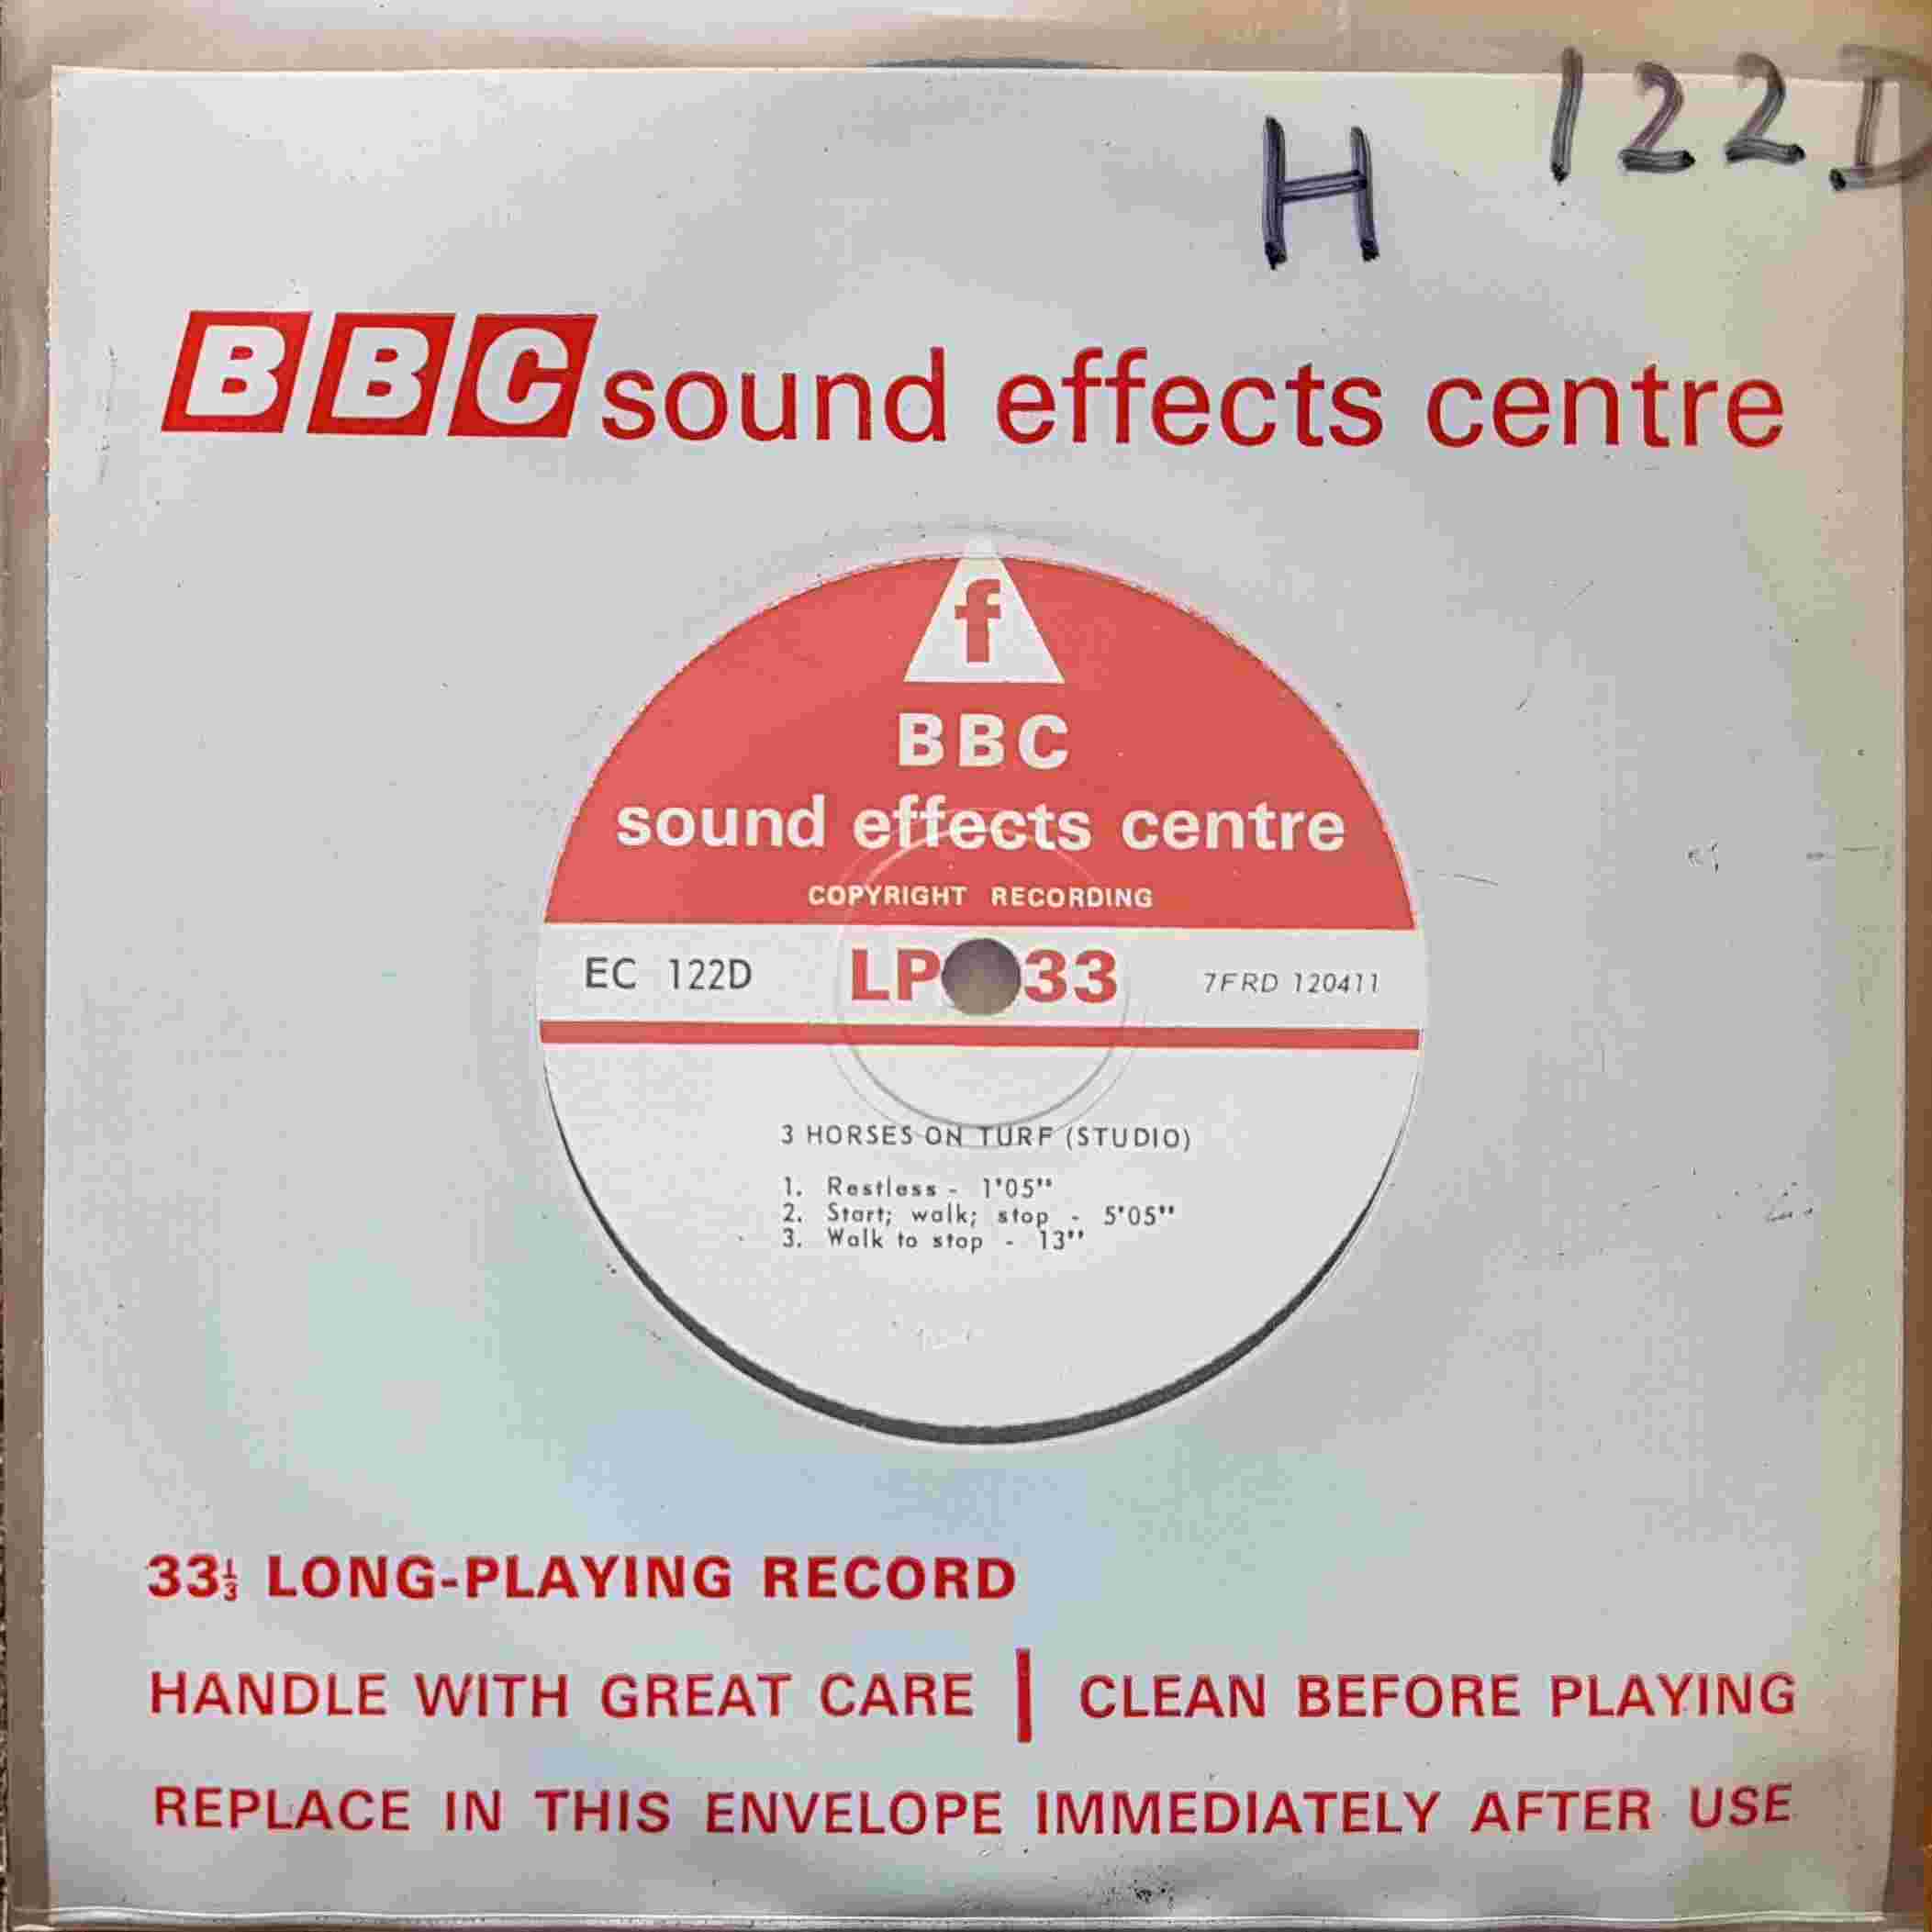 Picture of EC 122D 3 Horses on turf (Studio) by artist Not registered from the BBC records and Tapes library